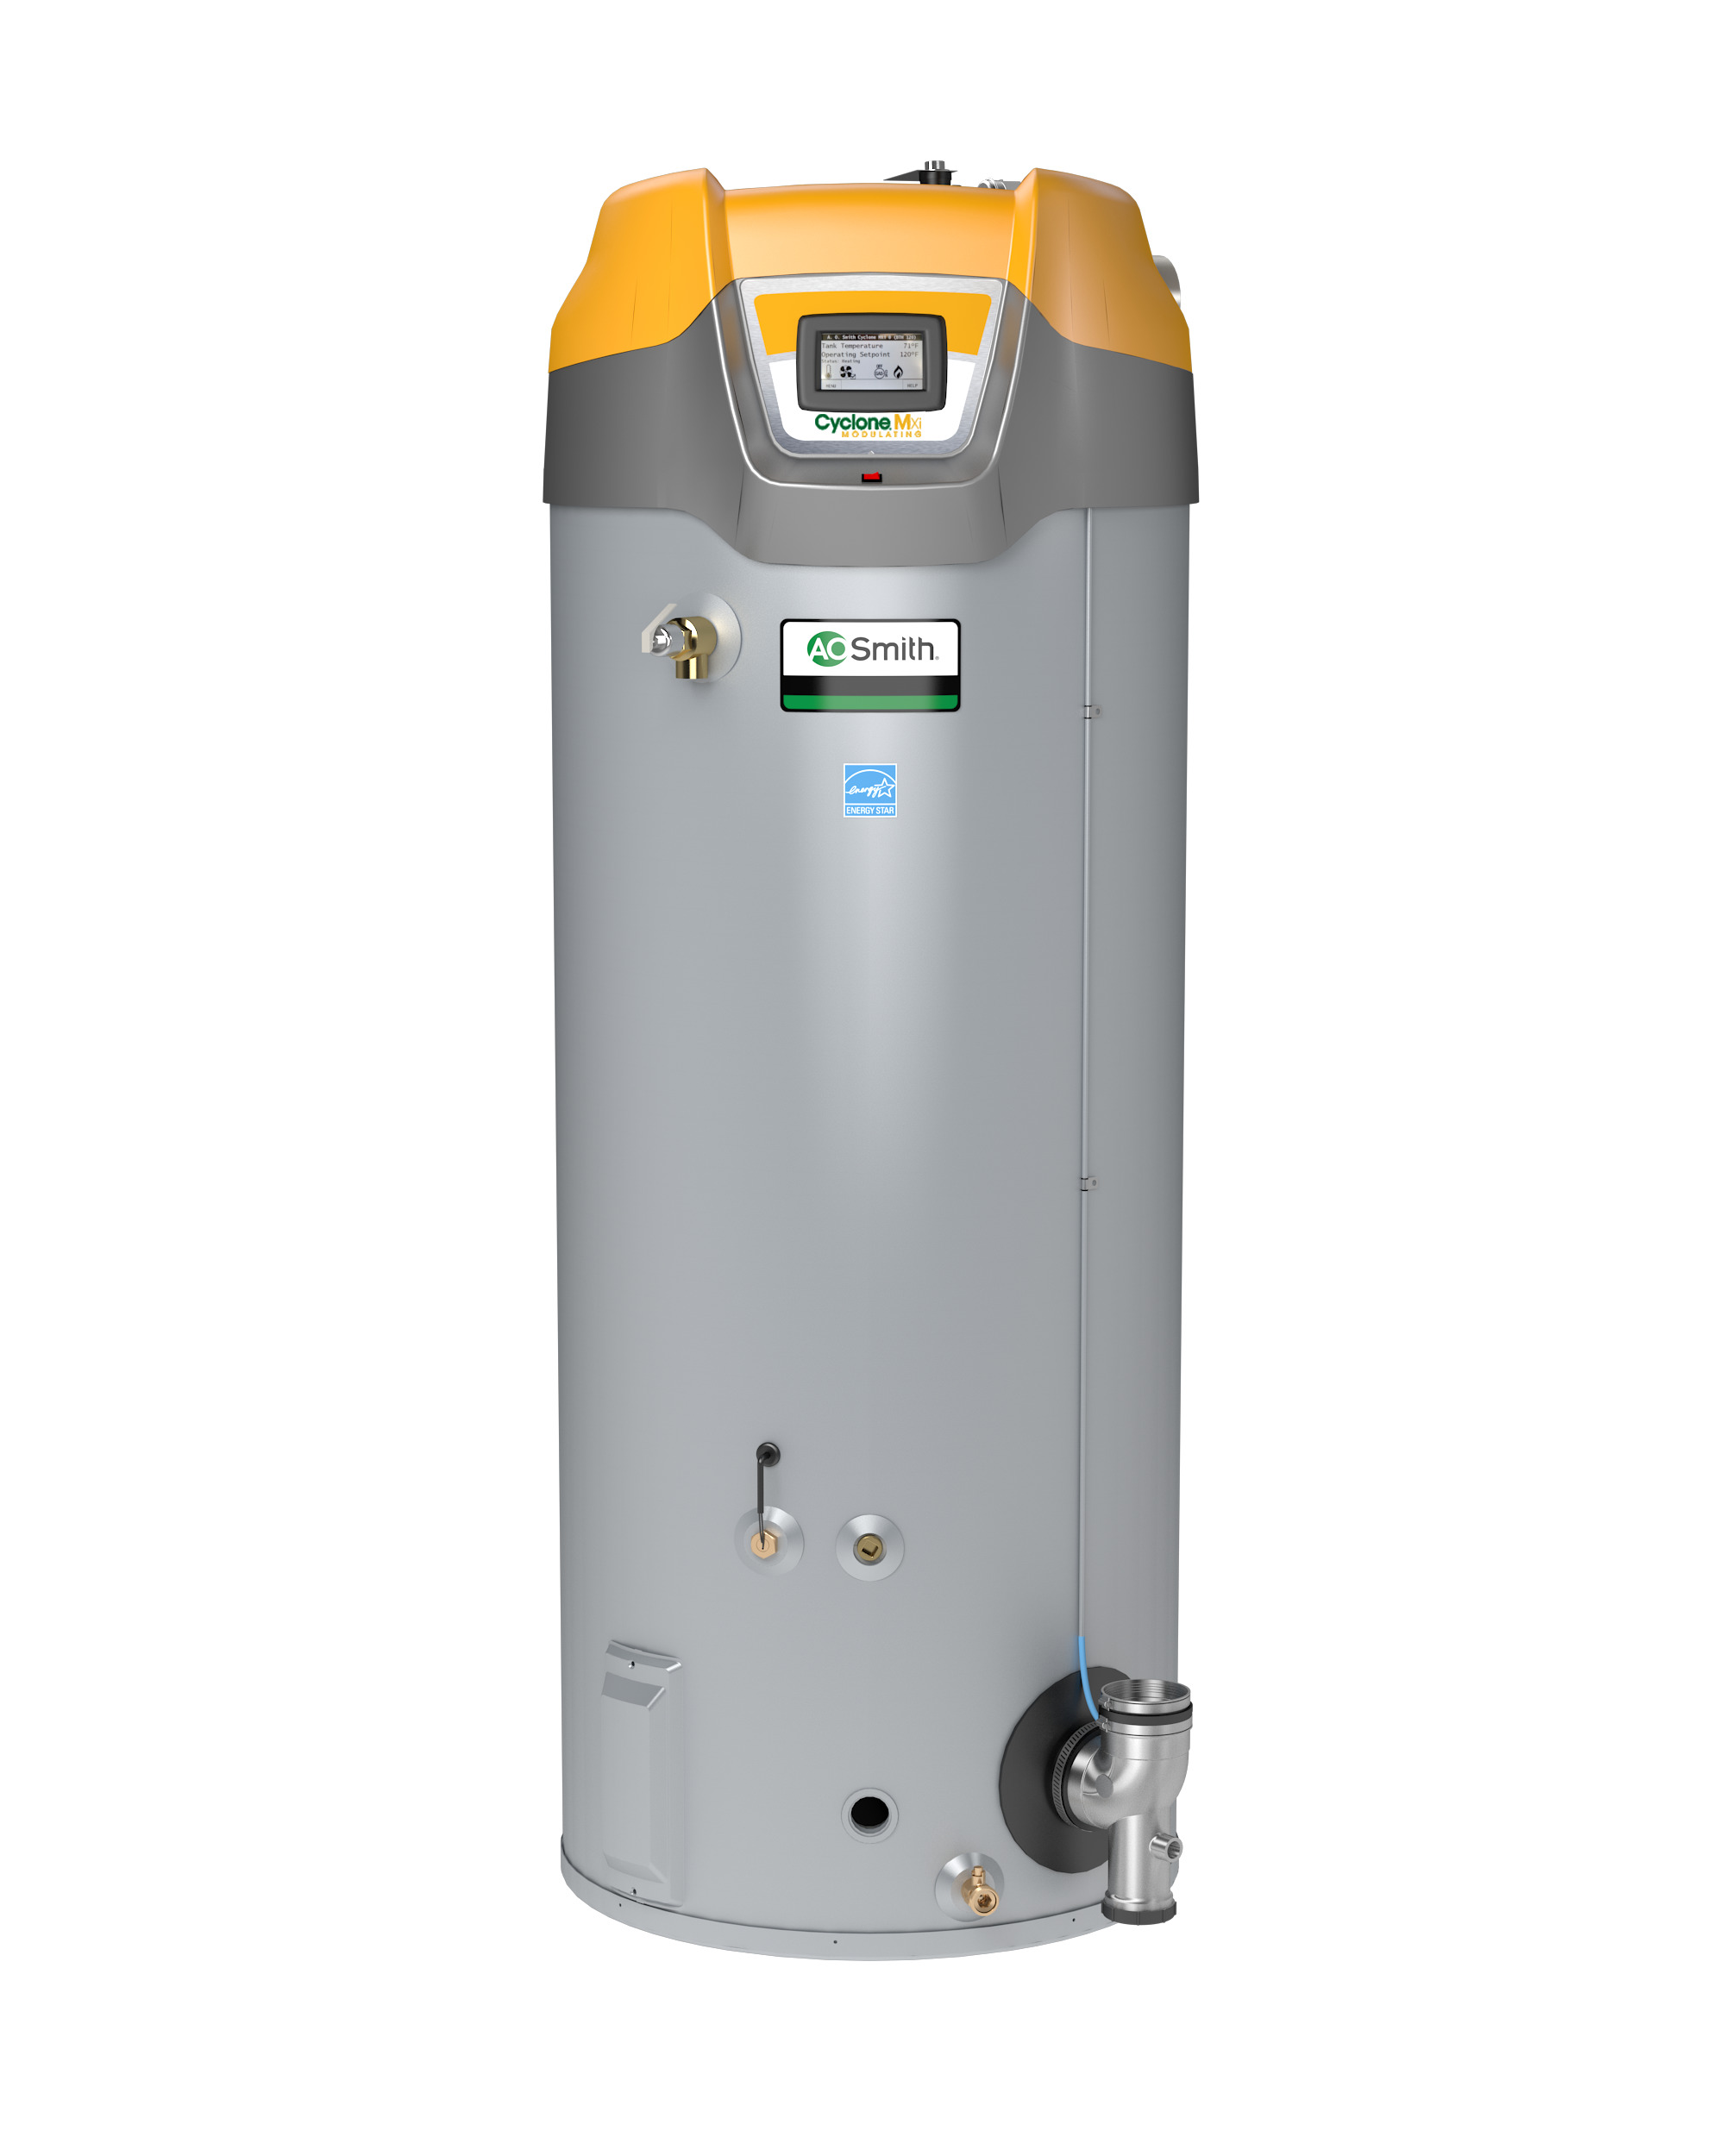 AO Smith BTX-100: 50 Gallon, 100,000 BTU, Cyclone Xi, Power direct Vent, Commercial Gas Water Heater, 2" OR 3" Vent, 96% Thermal Efficiency, Natural Gas, Certified from sea level to 10,100'.